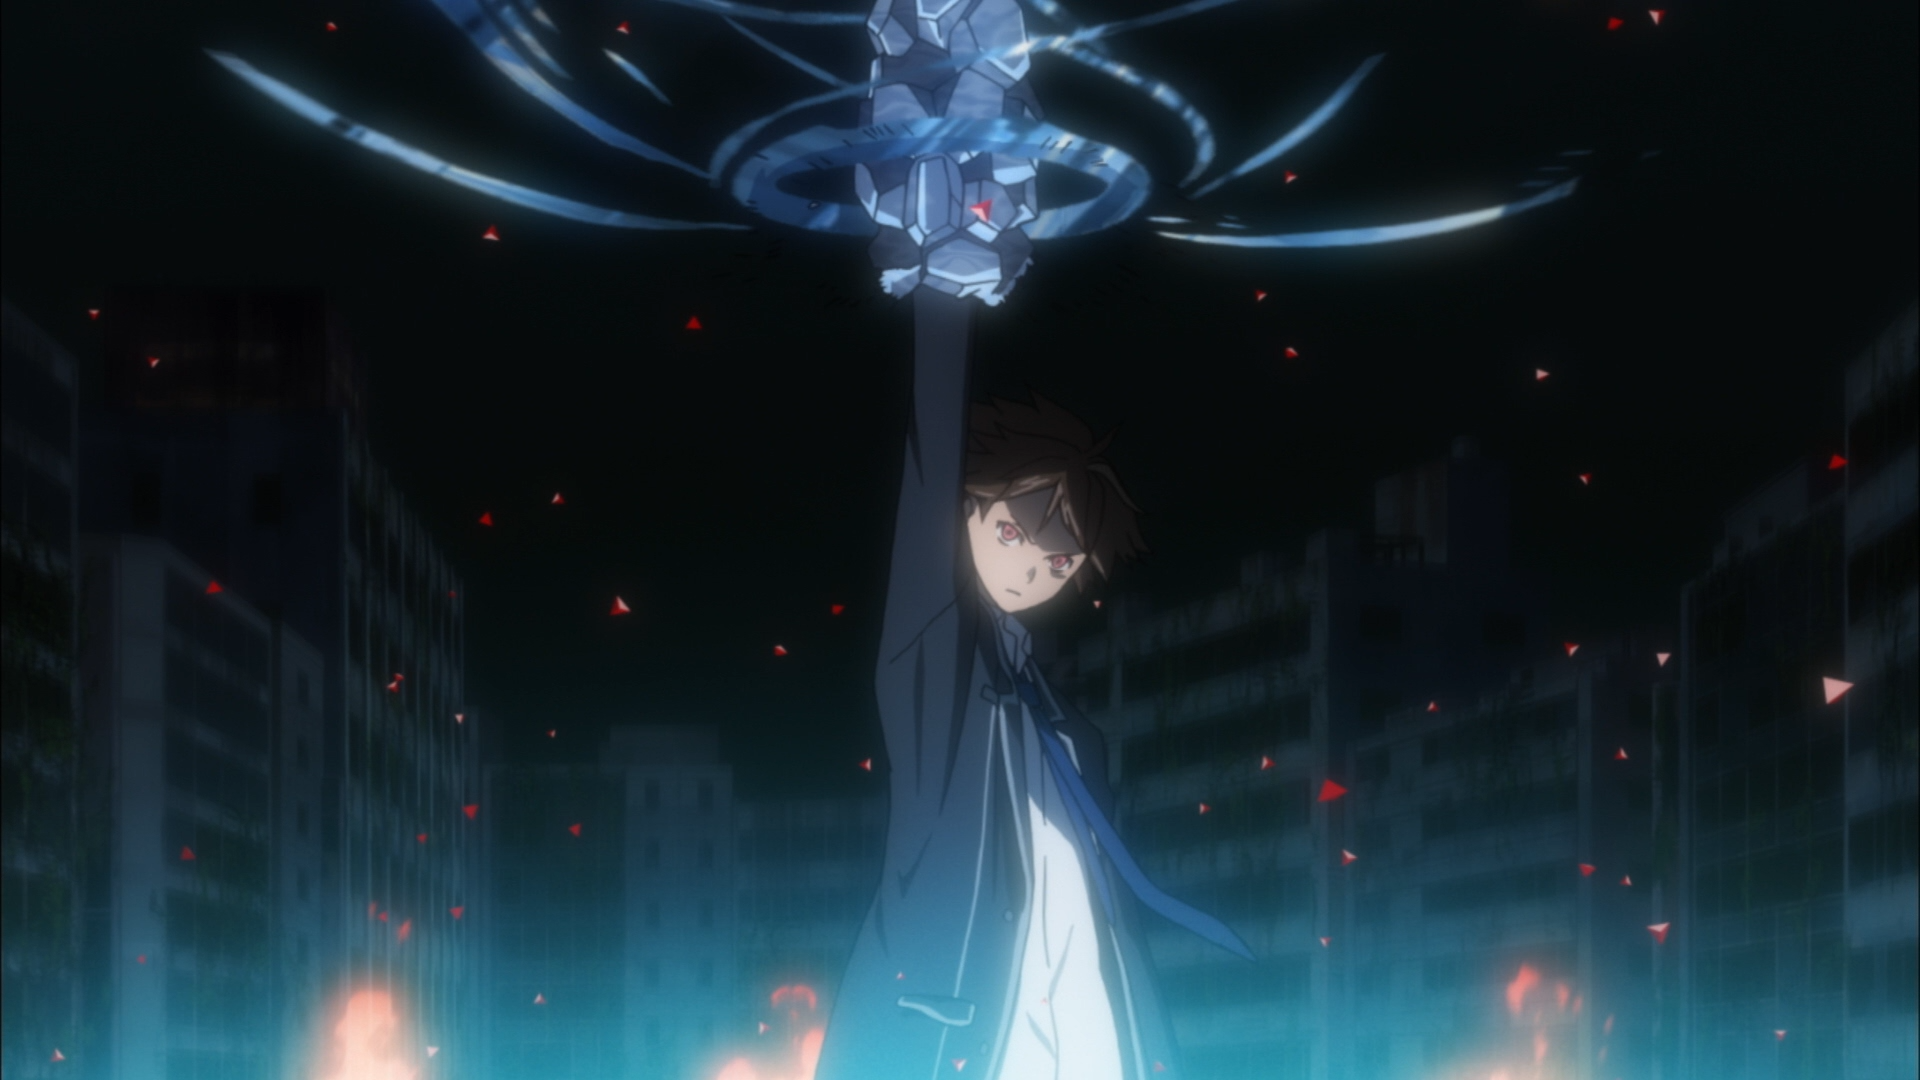 Guilty Crown Part 1 Blu-ray review